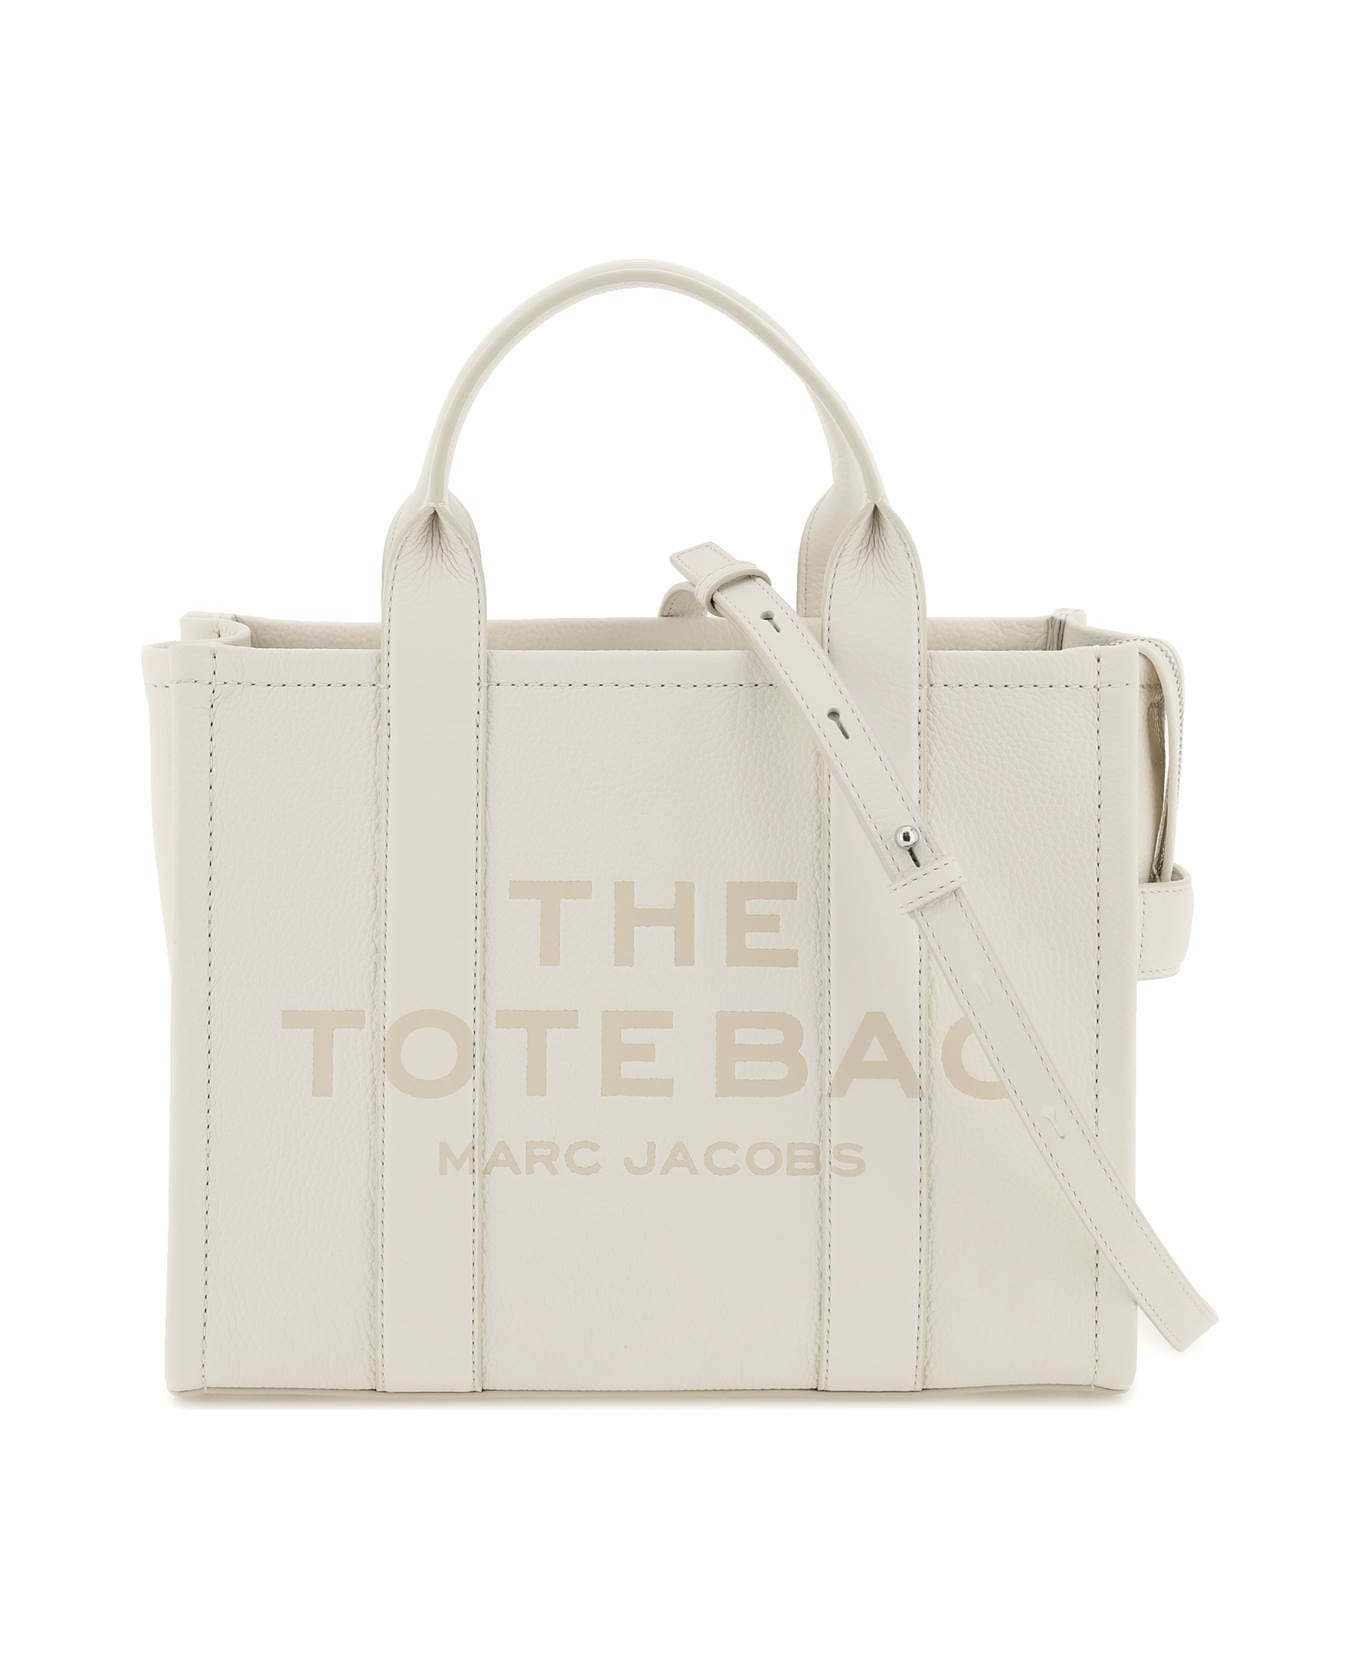 Marc Jacobs Leather The Tote Bag - White トートバッグ